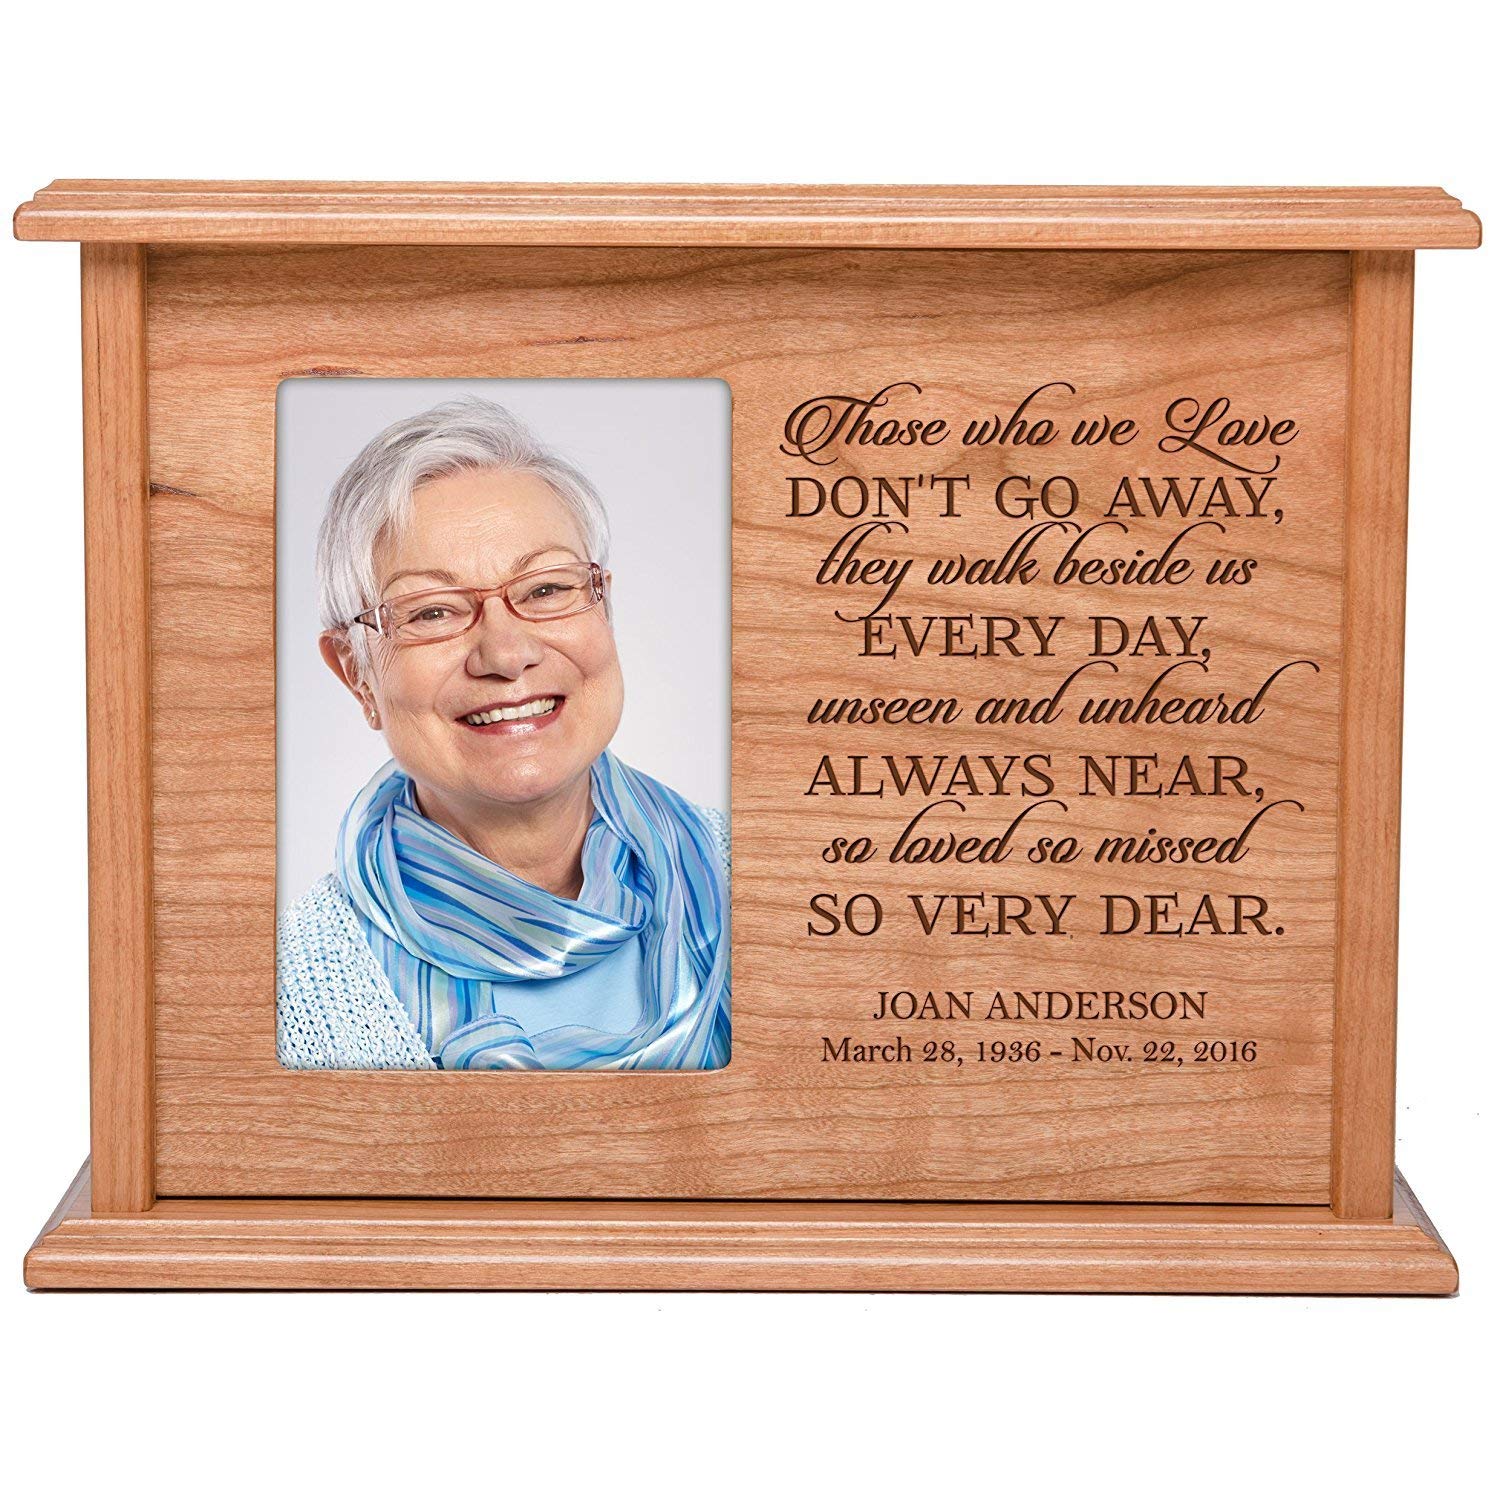 Custom Engraved Cherry Wood Urn Box with 4x6 Photo holds 200cu in of Human Ashes Those Who We Love - LifeSong Milestones